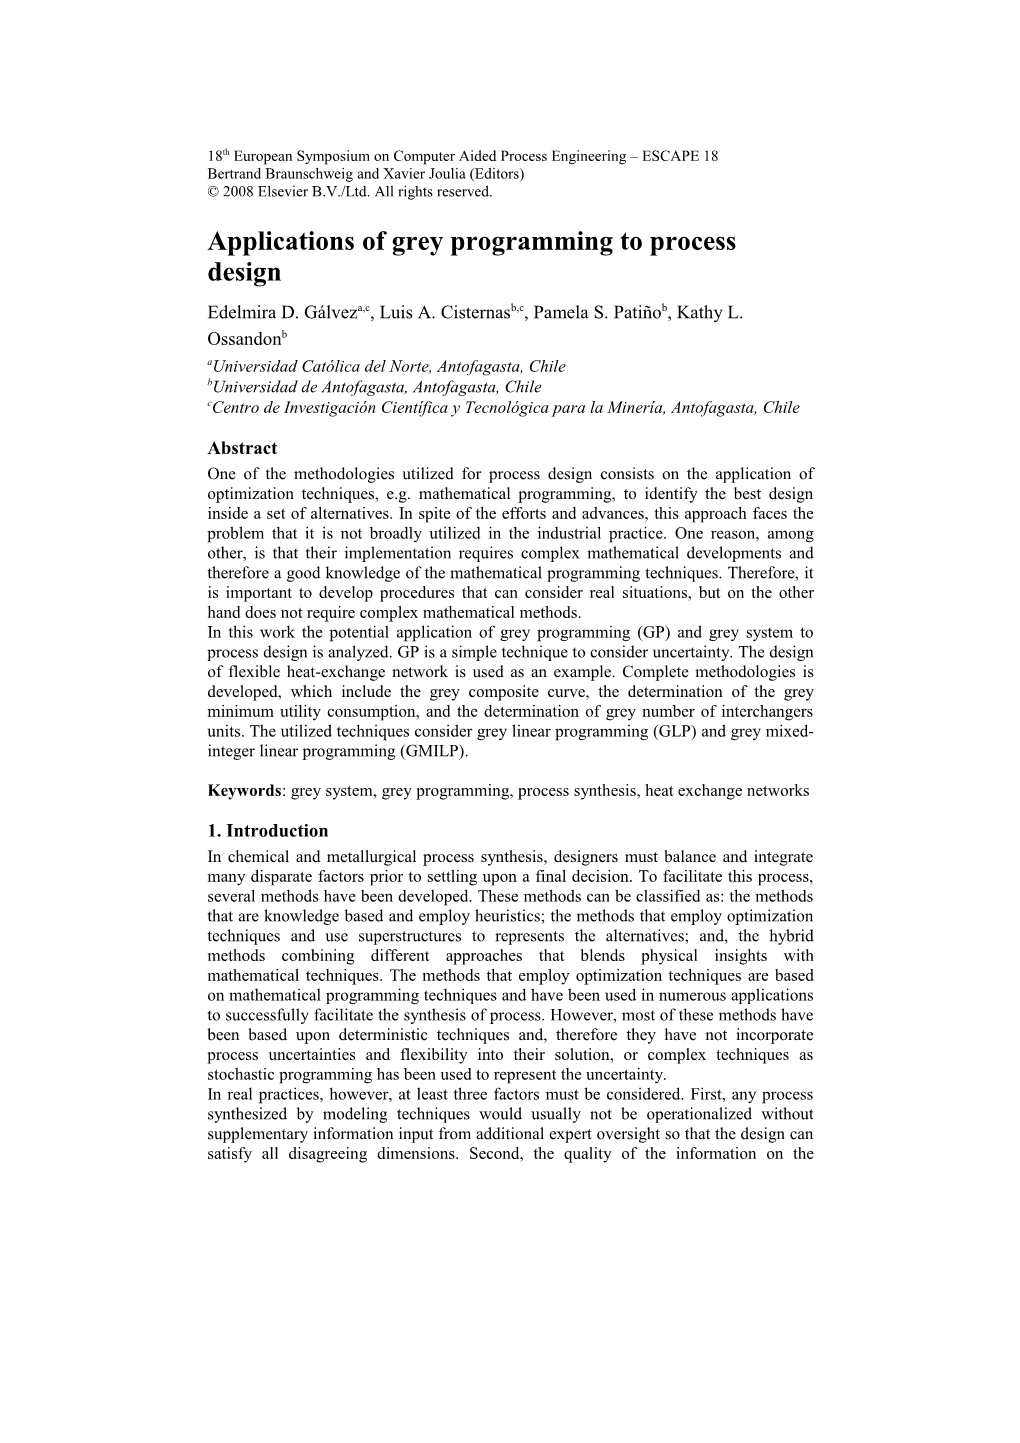 Applications of Grey Programming to Process Design